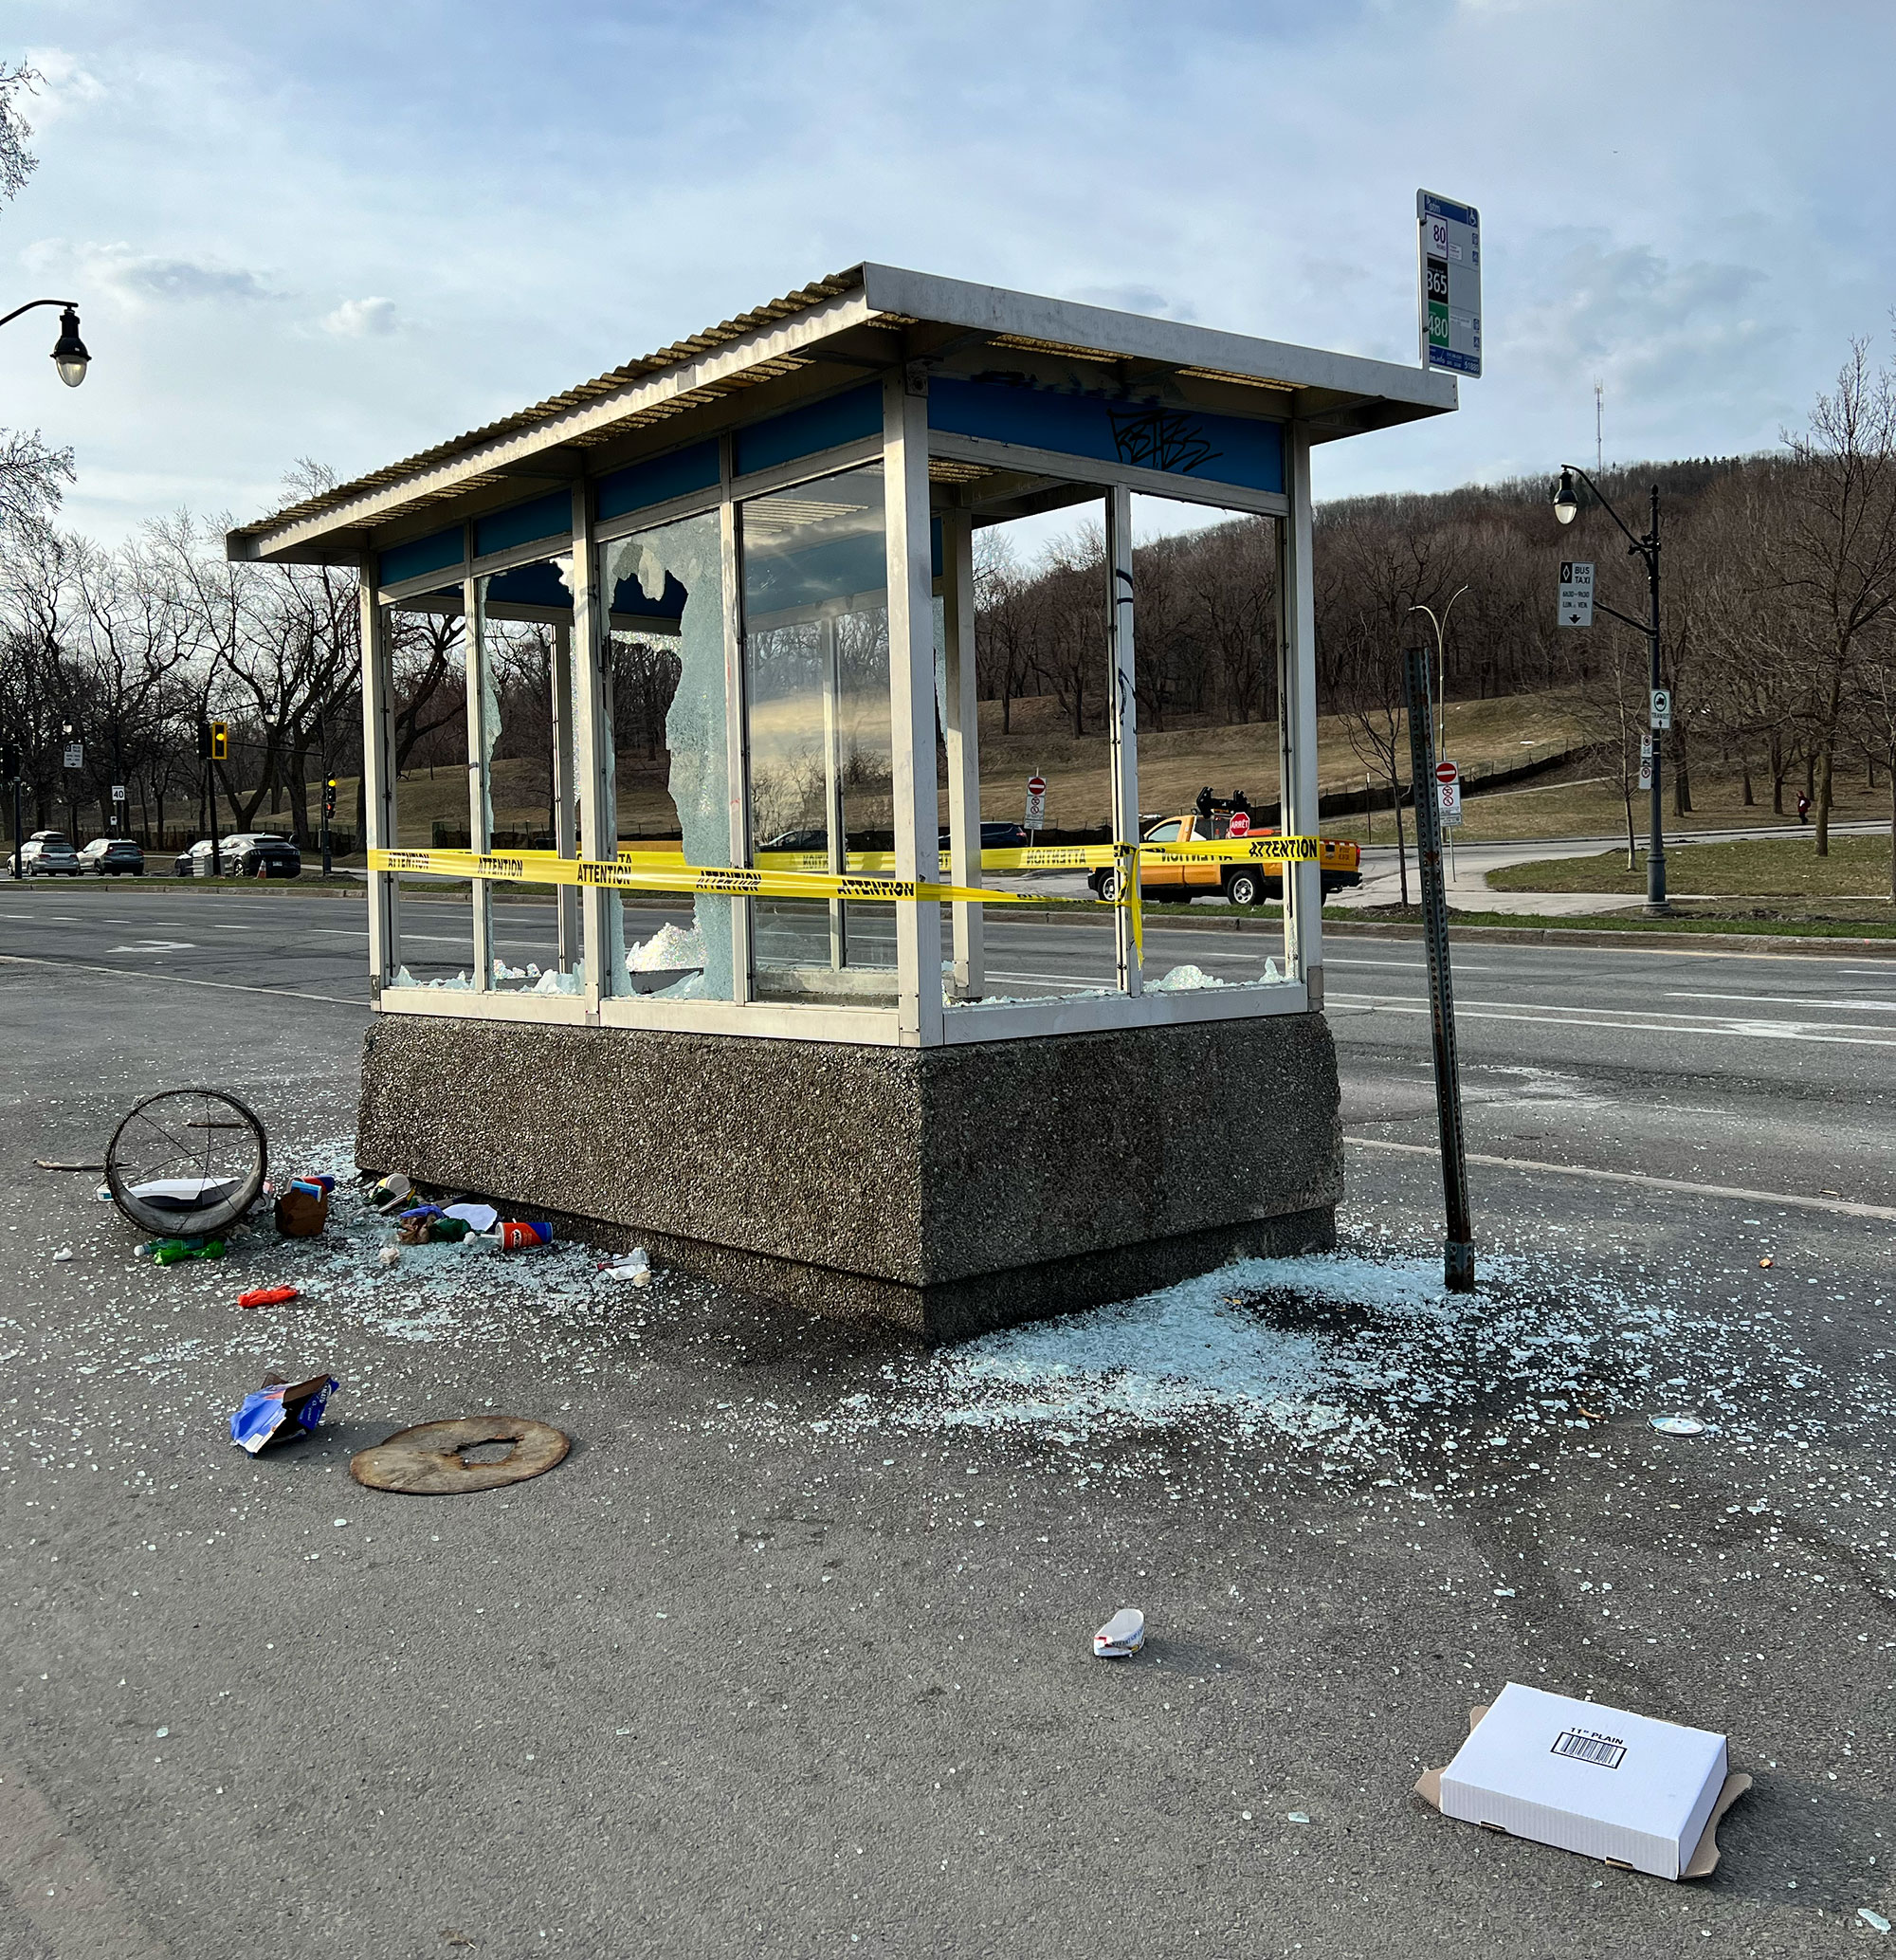 Damaged bus shelter with shattered glass and yellow caution tape, surrounded by debris including a bicycle wheel and a pizza box, with a road and park in the background.